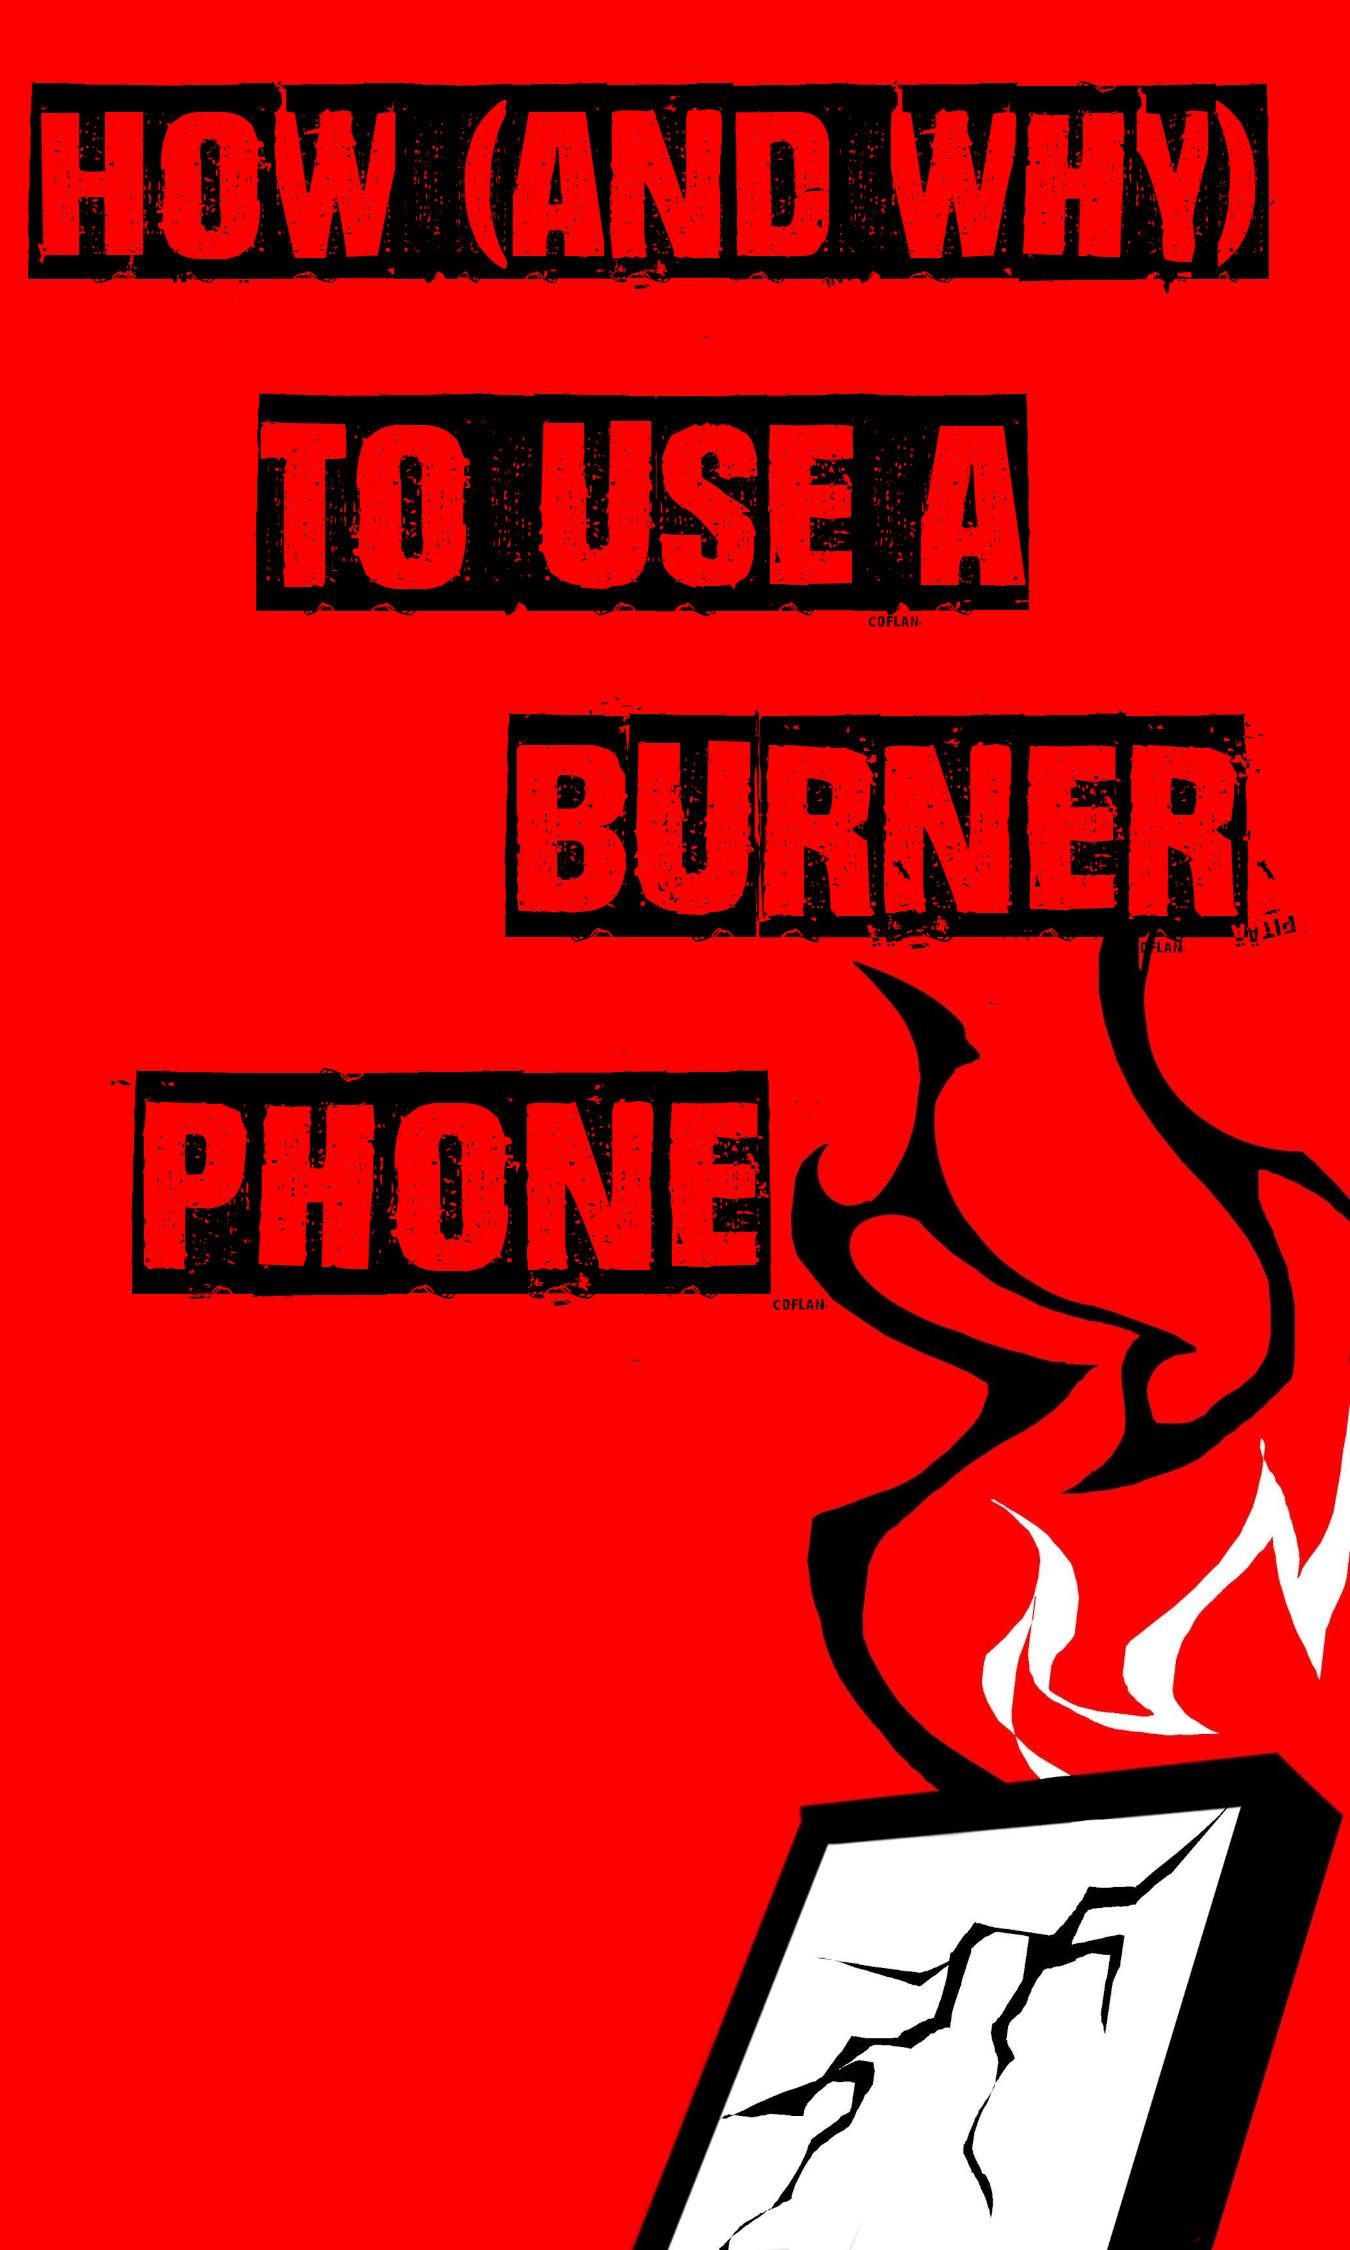 a-h-anonymous-how-and-why-to-use-a-burner-phone-1.jpg